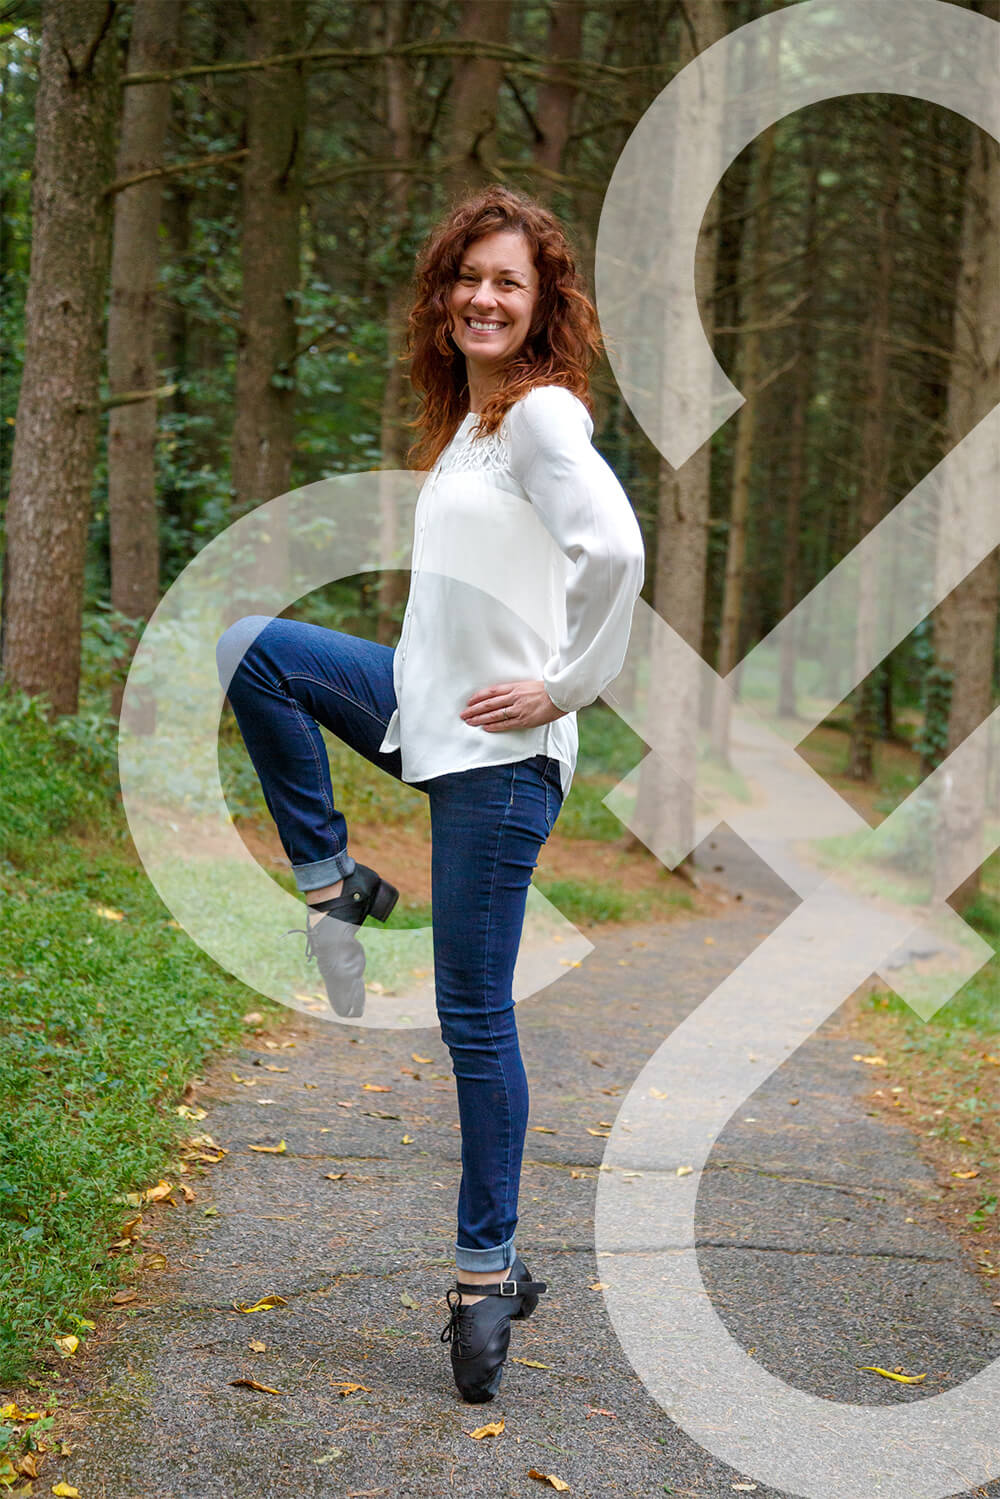 An image of an adult woman dancing in the woods. The woman has red curly hair and is wearing a white shirt, blue jeans, and Irish dance hard shoes. She is balancing on her back toe with her front leg lifted. The IDTANA logo is entwined throughout.